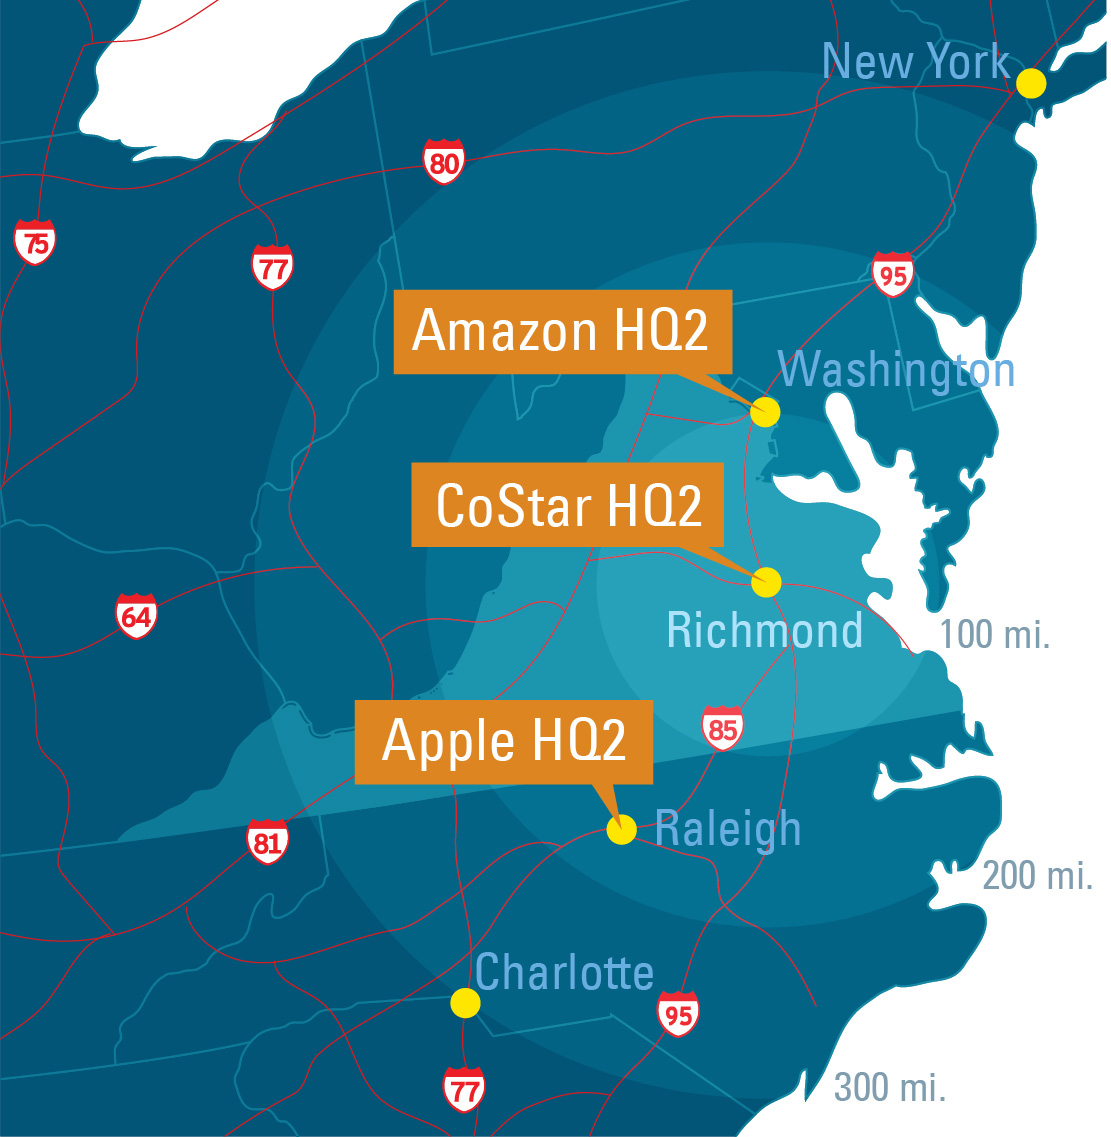 Map displays CoStar HQ2 between Amazon HQ2 and Apple HQ2.